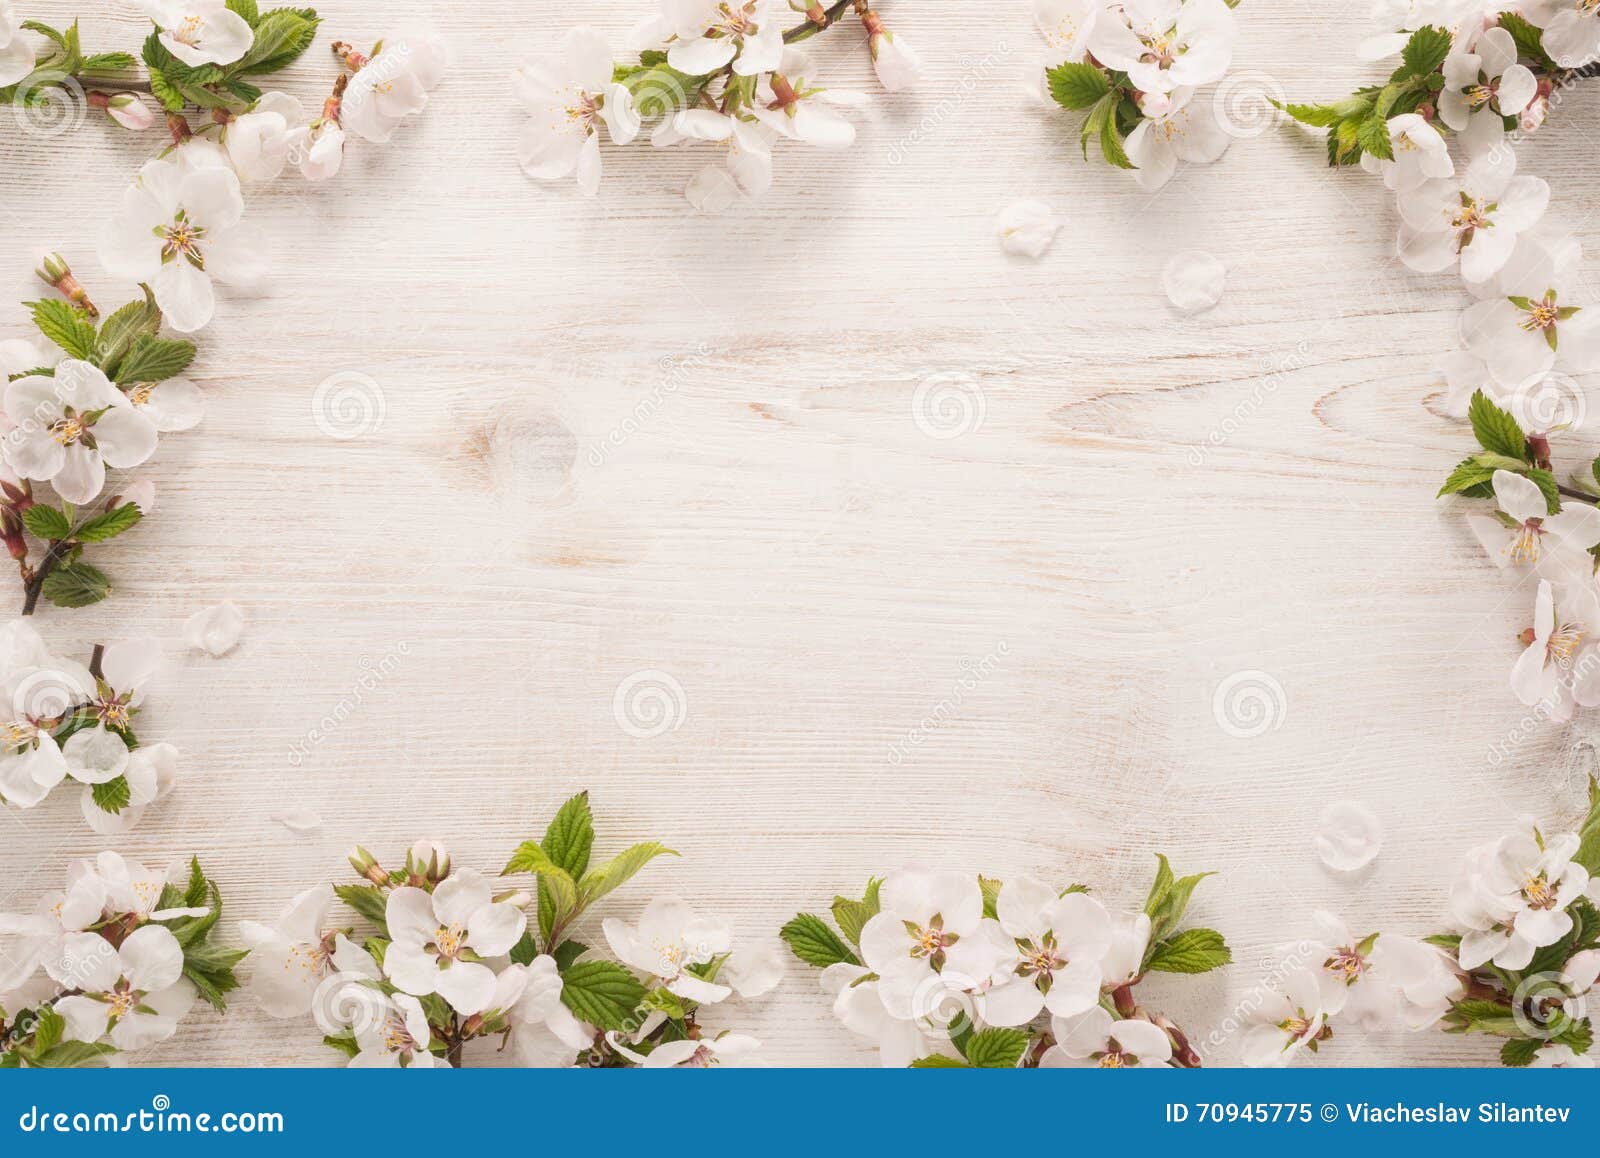 Spring flowers frame stock image. Image of abstract, nature - 70945775